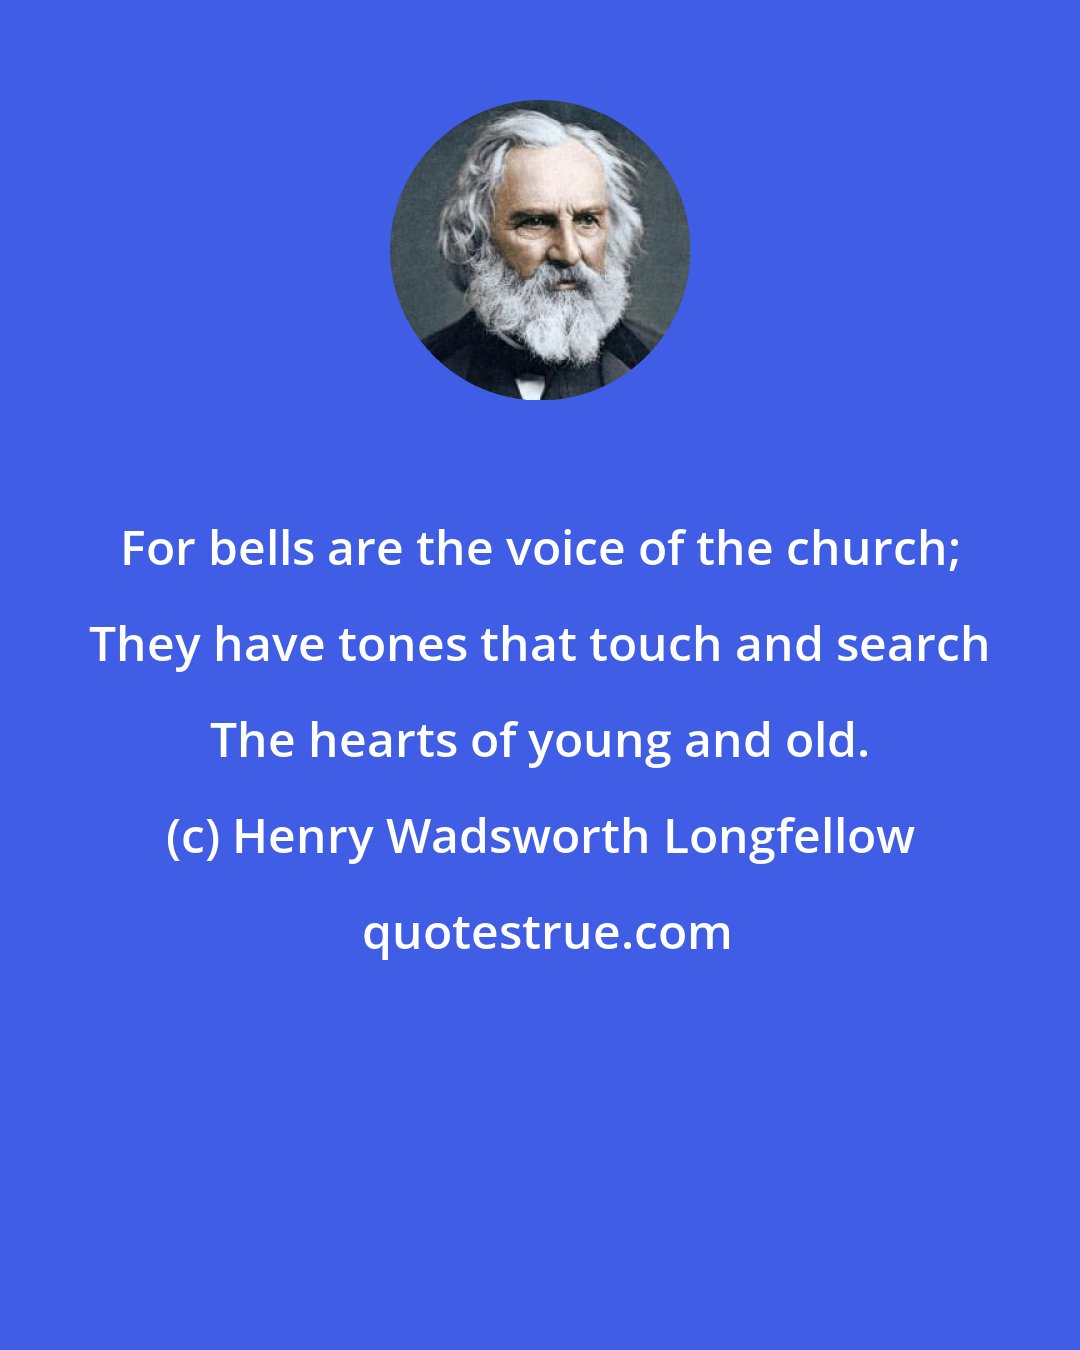 Henry Wadsworth Longfellow: For bells are the voice of the church; They have tones that touch and search The hearts of young and old.